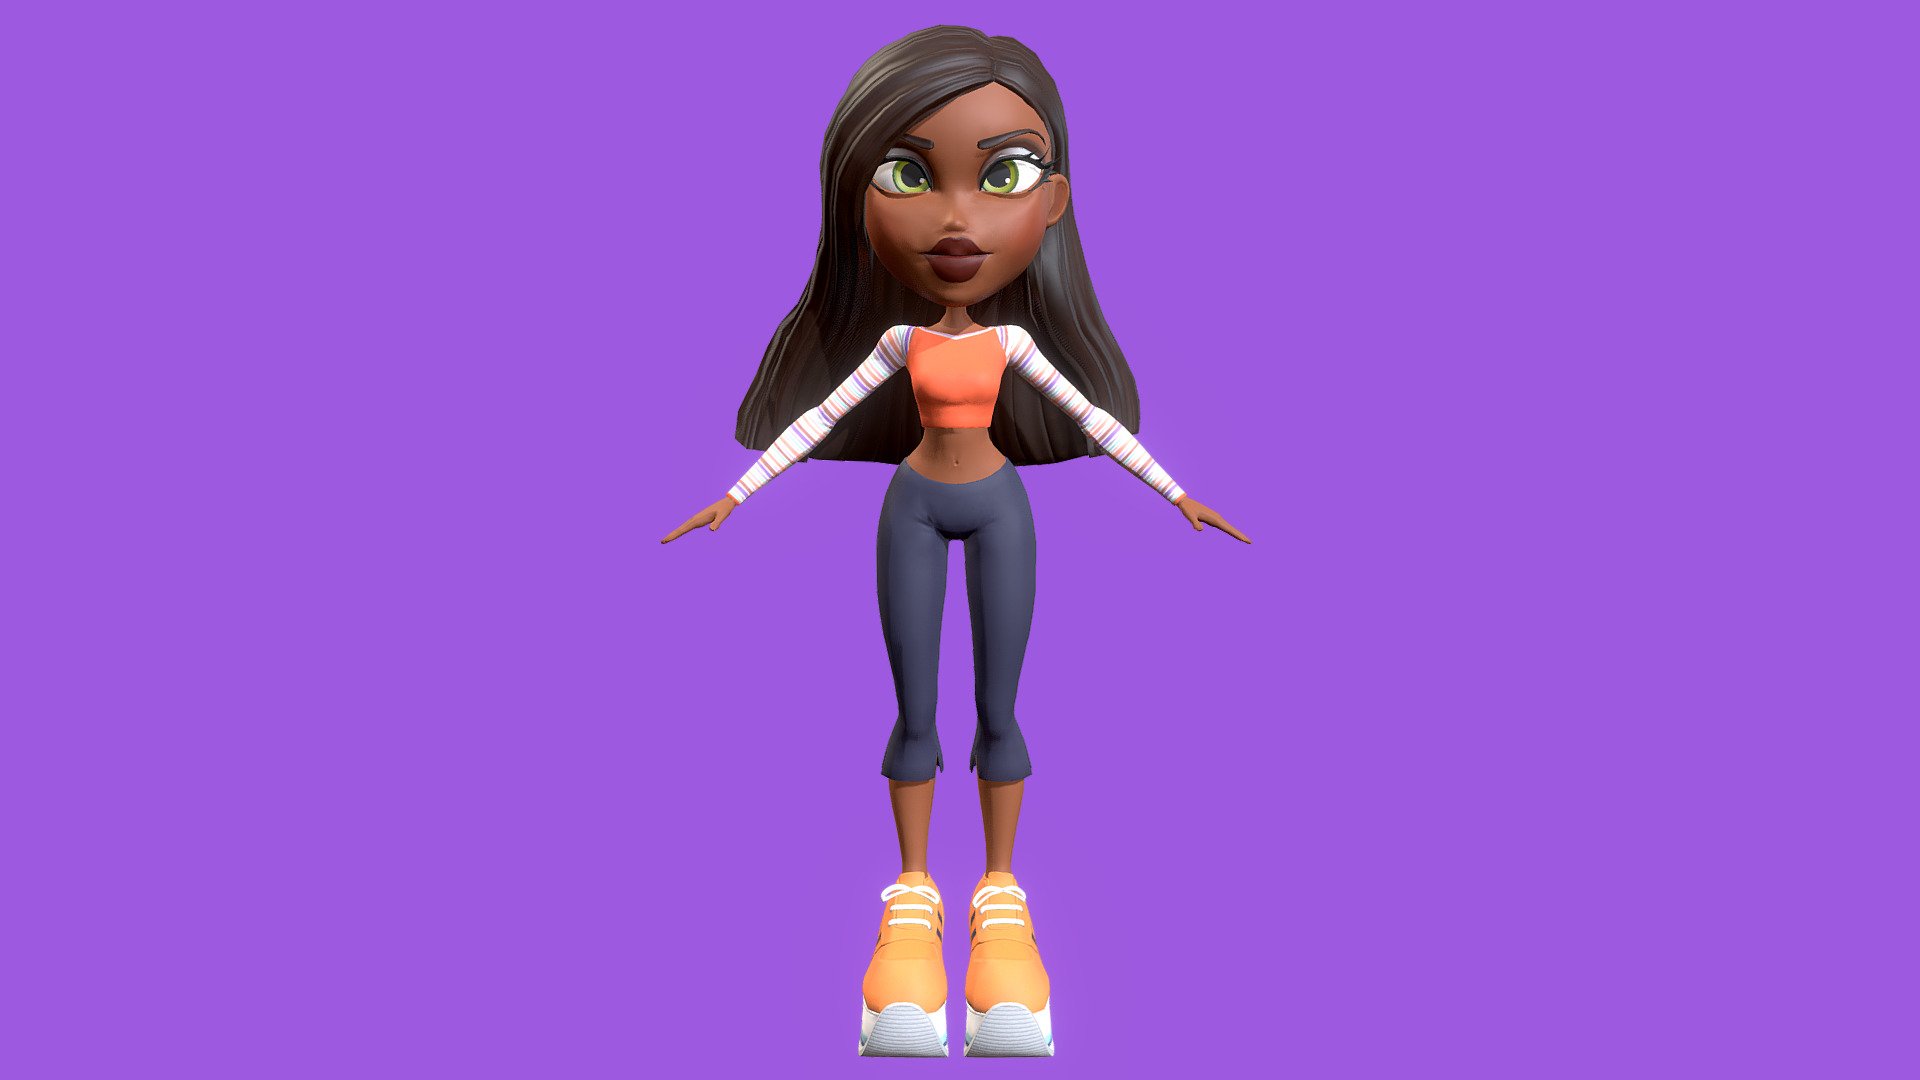 This model is based on the character Sasha from the game: Bratz: Flaunt your fashion.
IG: https://www.instagram.com/camiloohh/ - Bratz model free - 3D model by camilooh 3d model